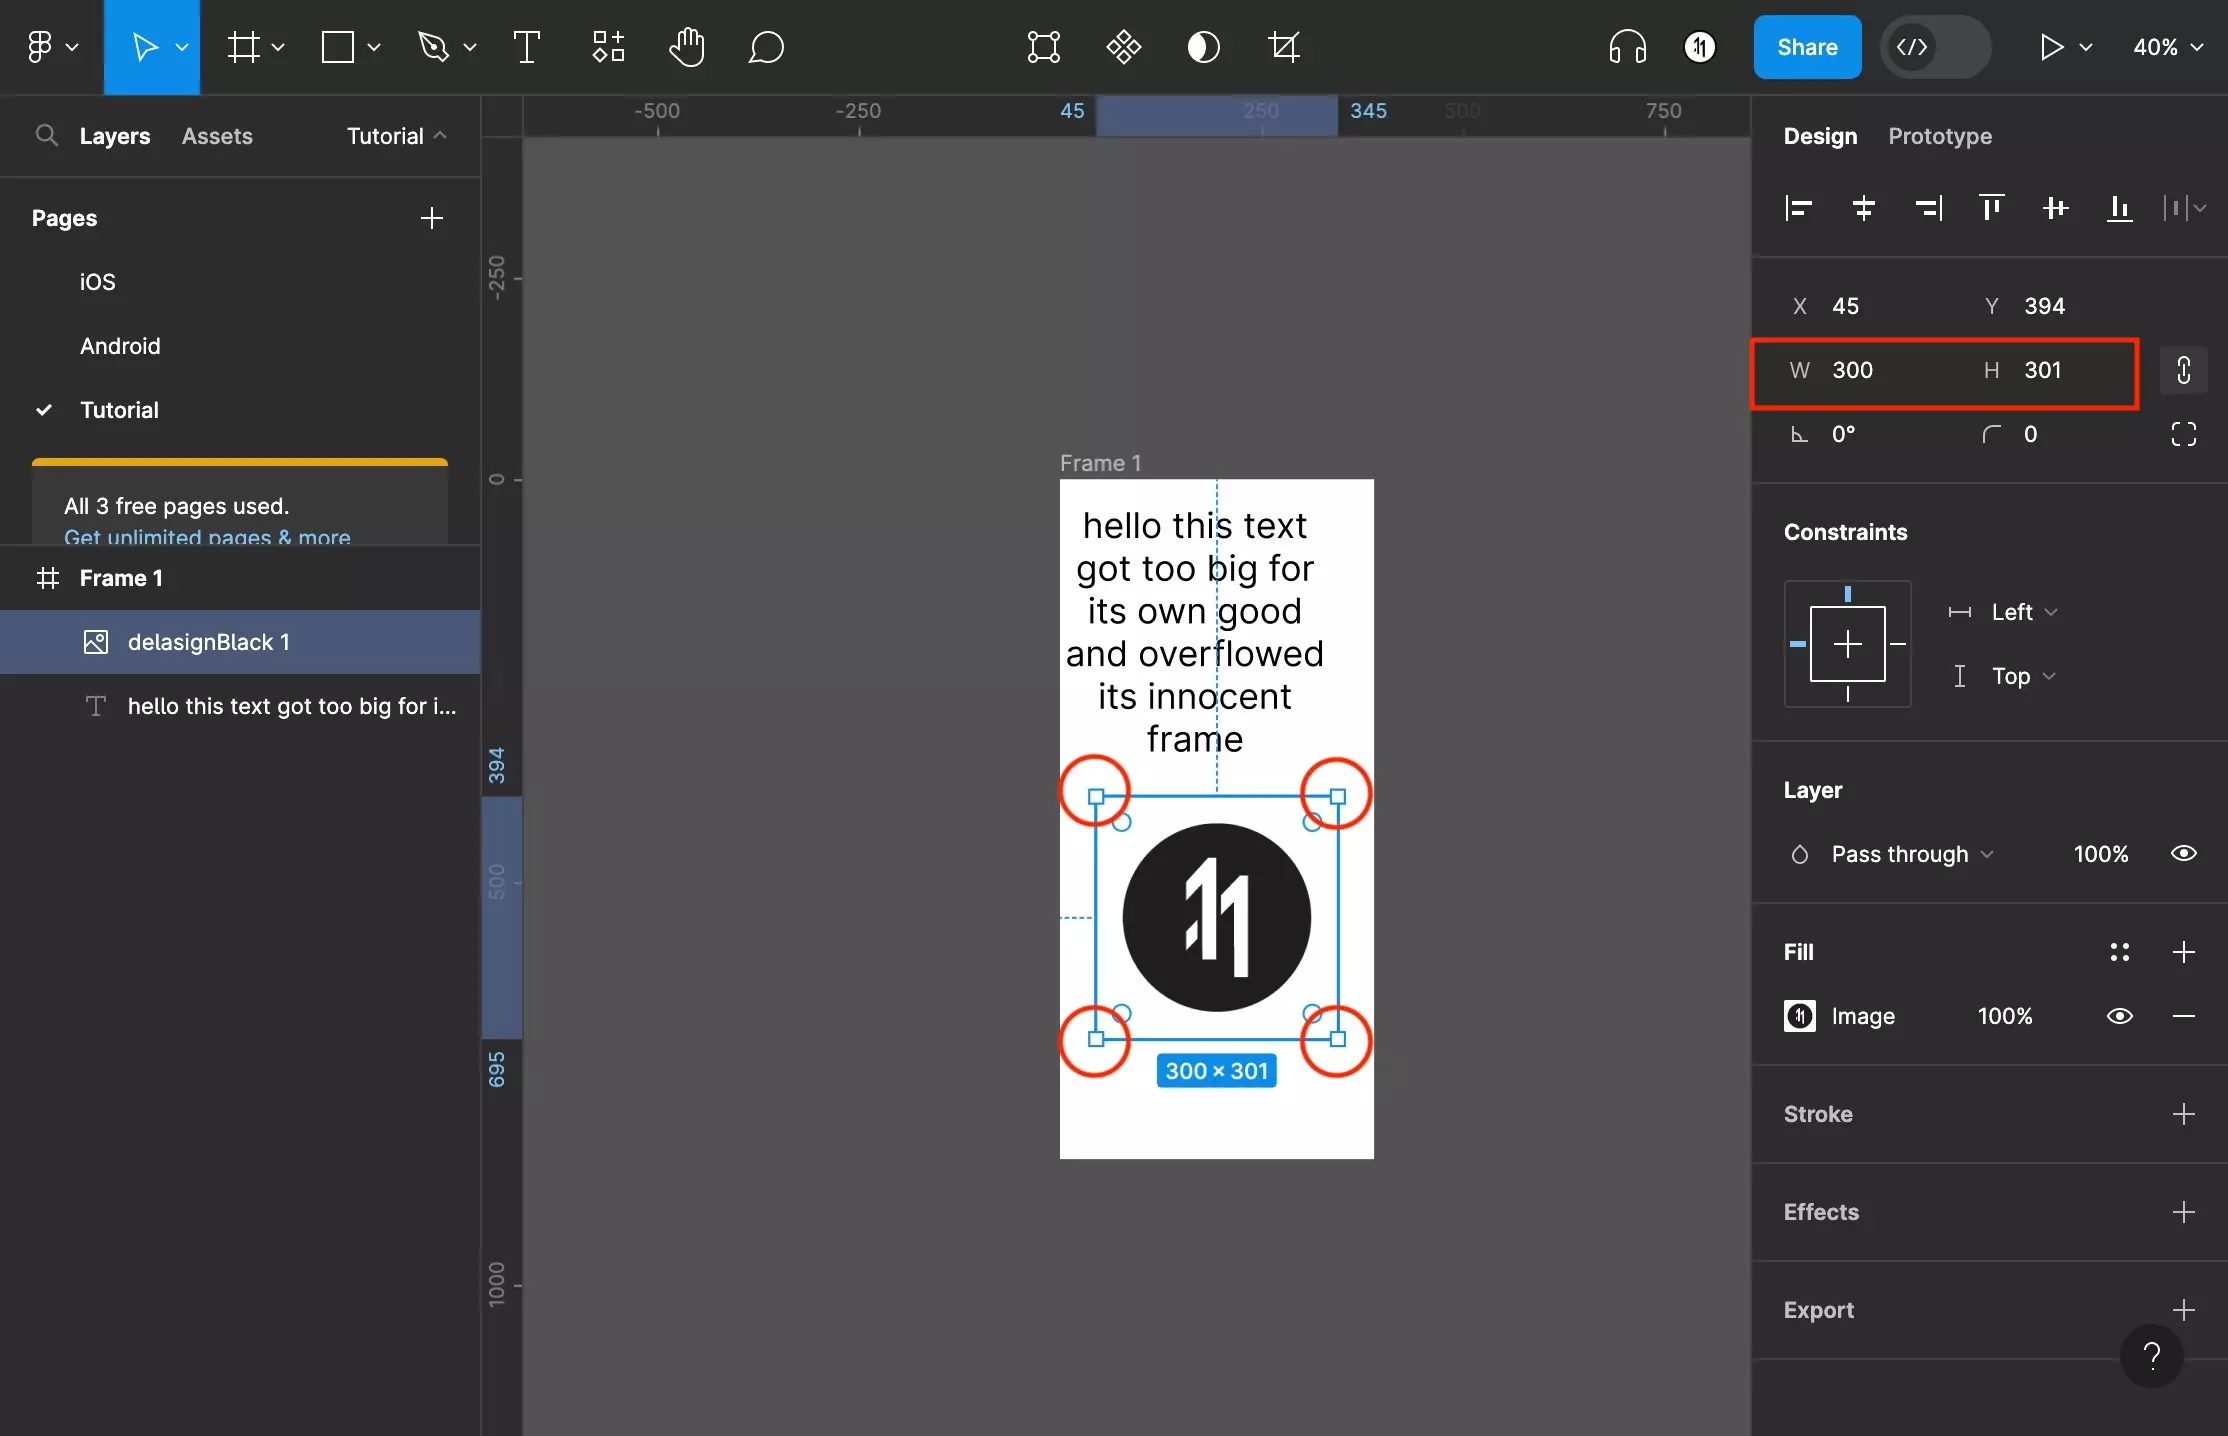 A screenshot of Figma with a highlight on the corners of the image that was dragged in. These corners have squares which represent handles, which allow you to resize an image. We have also highlighted the dimensions on the inspector on the right side bar.